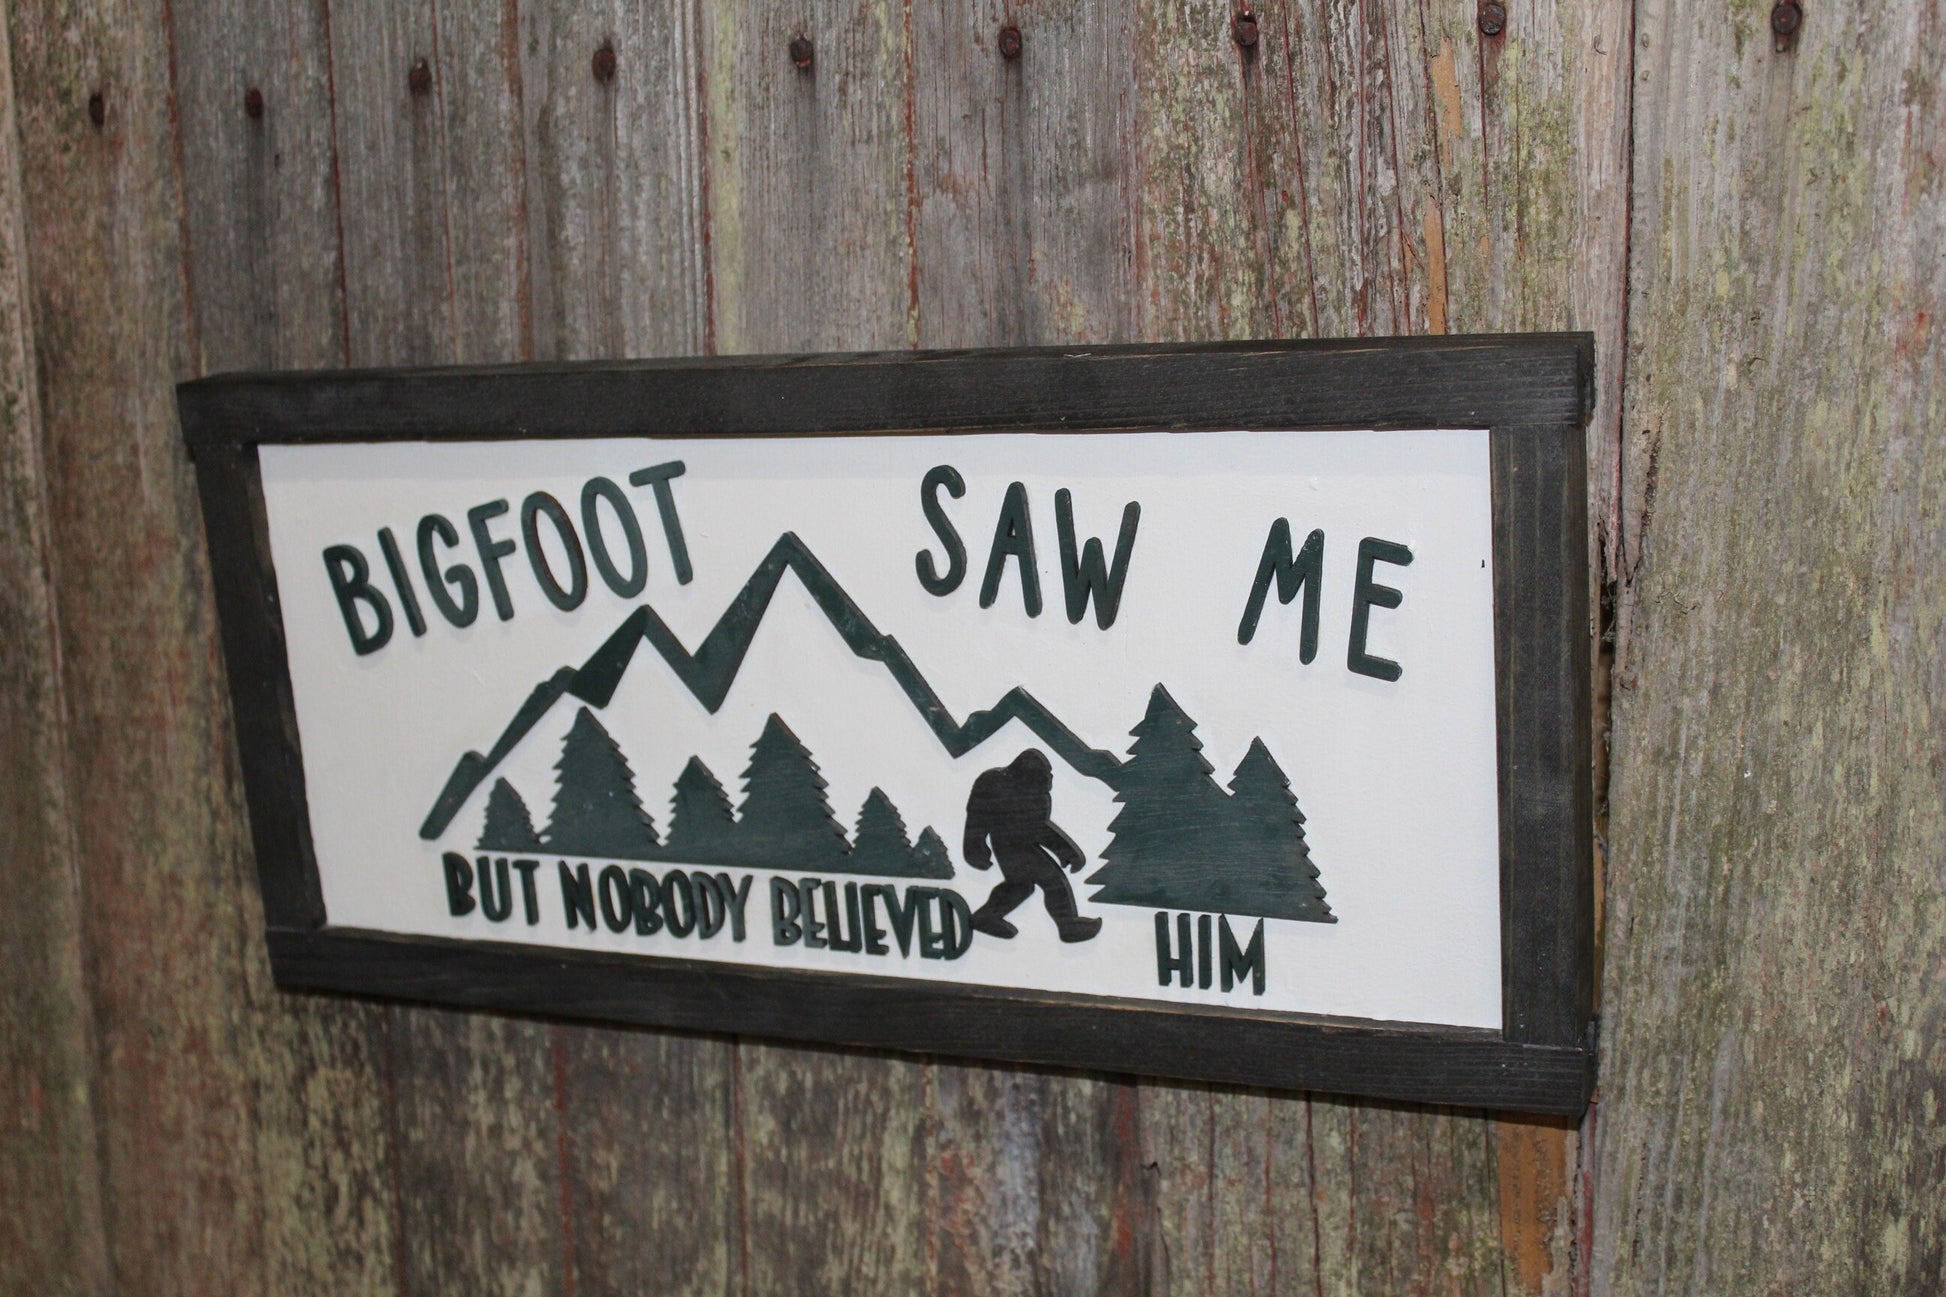 Bigfoot Saw Me But Nobody Believed Him Believer 3D Wood Sign Country Primitive Wall Hanging Decoration Mountains Joke Goofy Funny Rustic